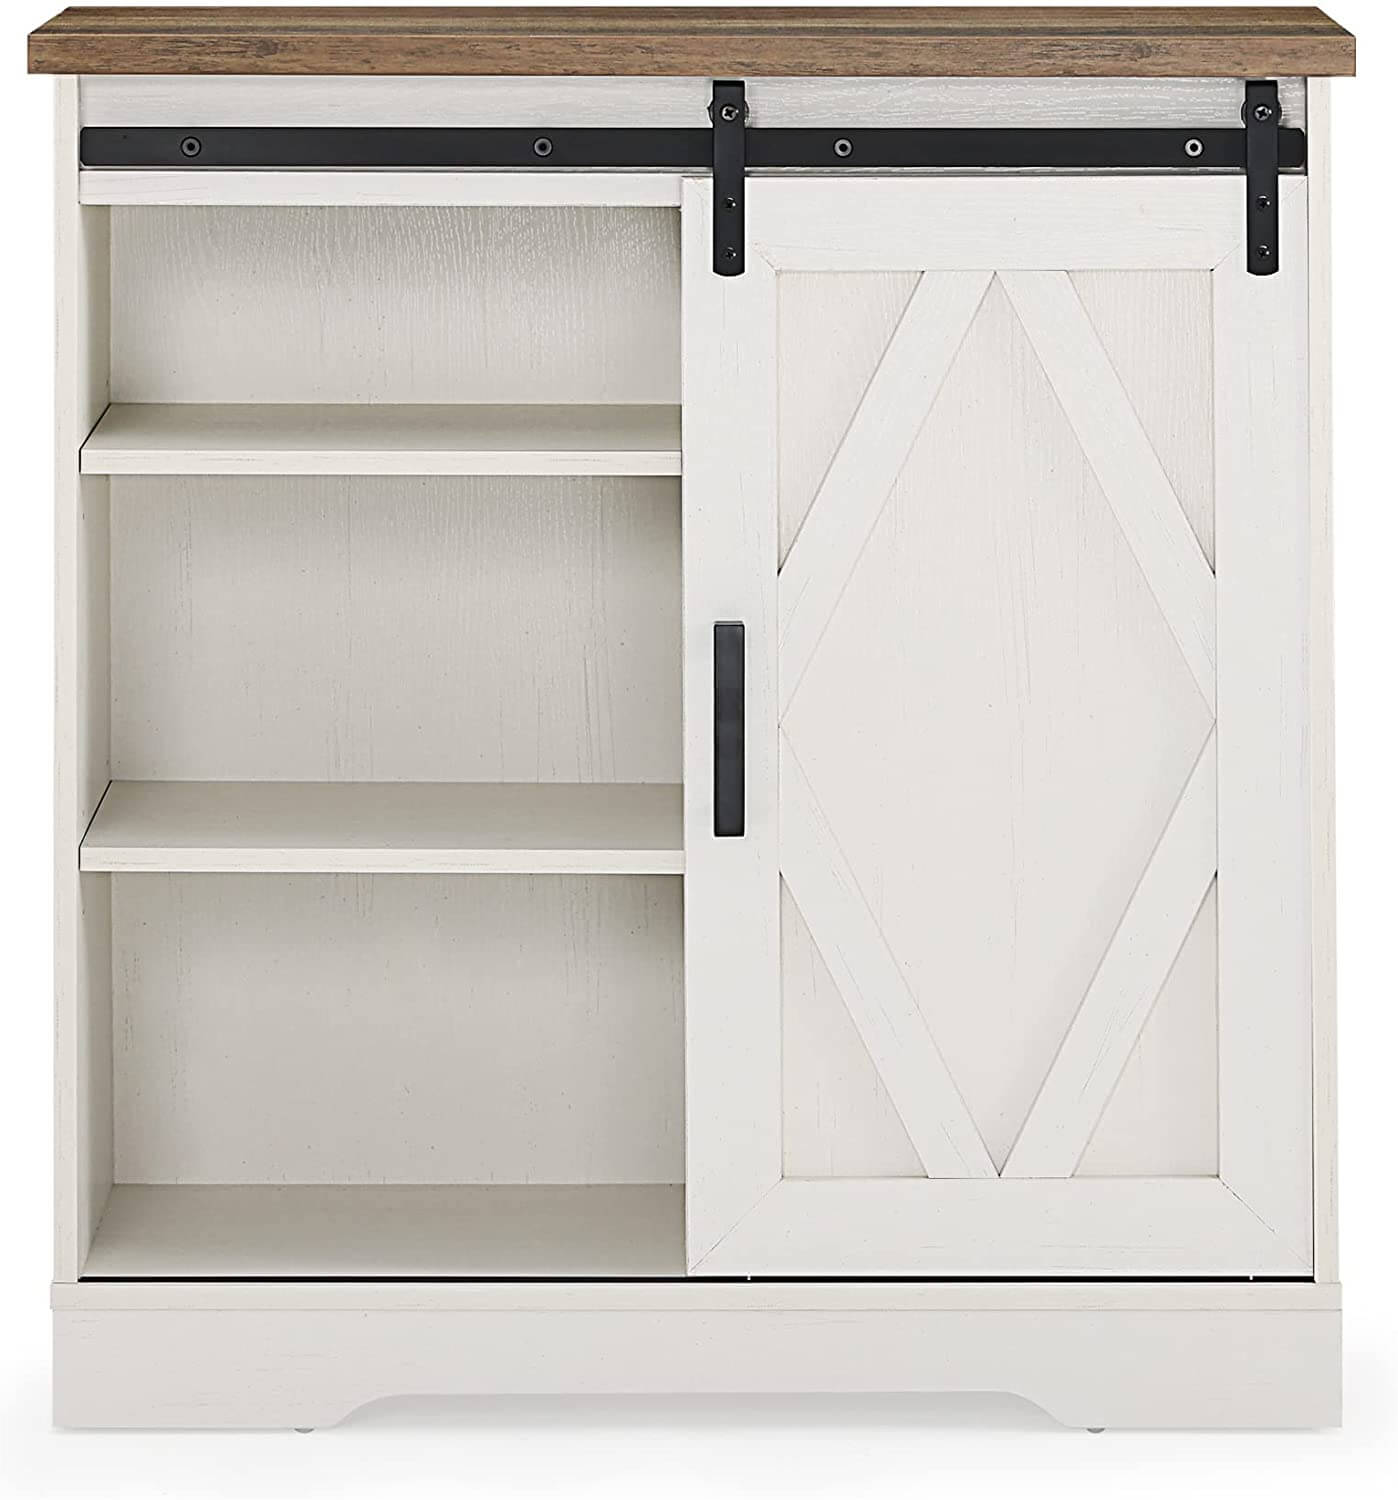 WAMPAT 35" Rustic Farmhouse Accent Buffet Sideboard Coffee Bar Cabinet with Sliding Barn Door & Yellow LED, White